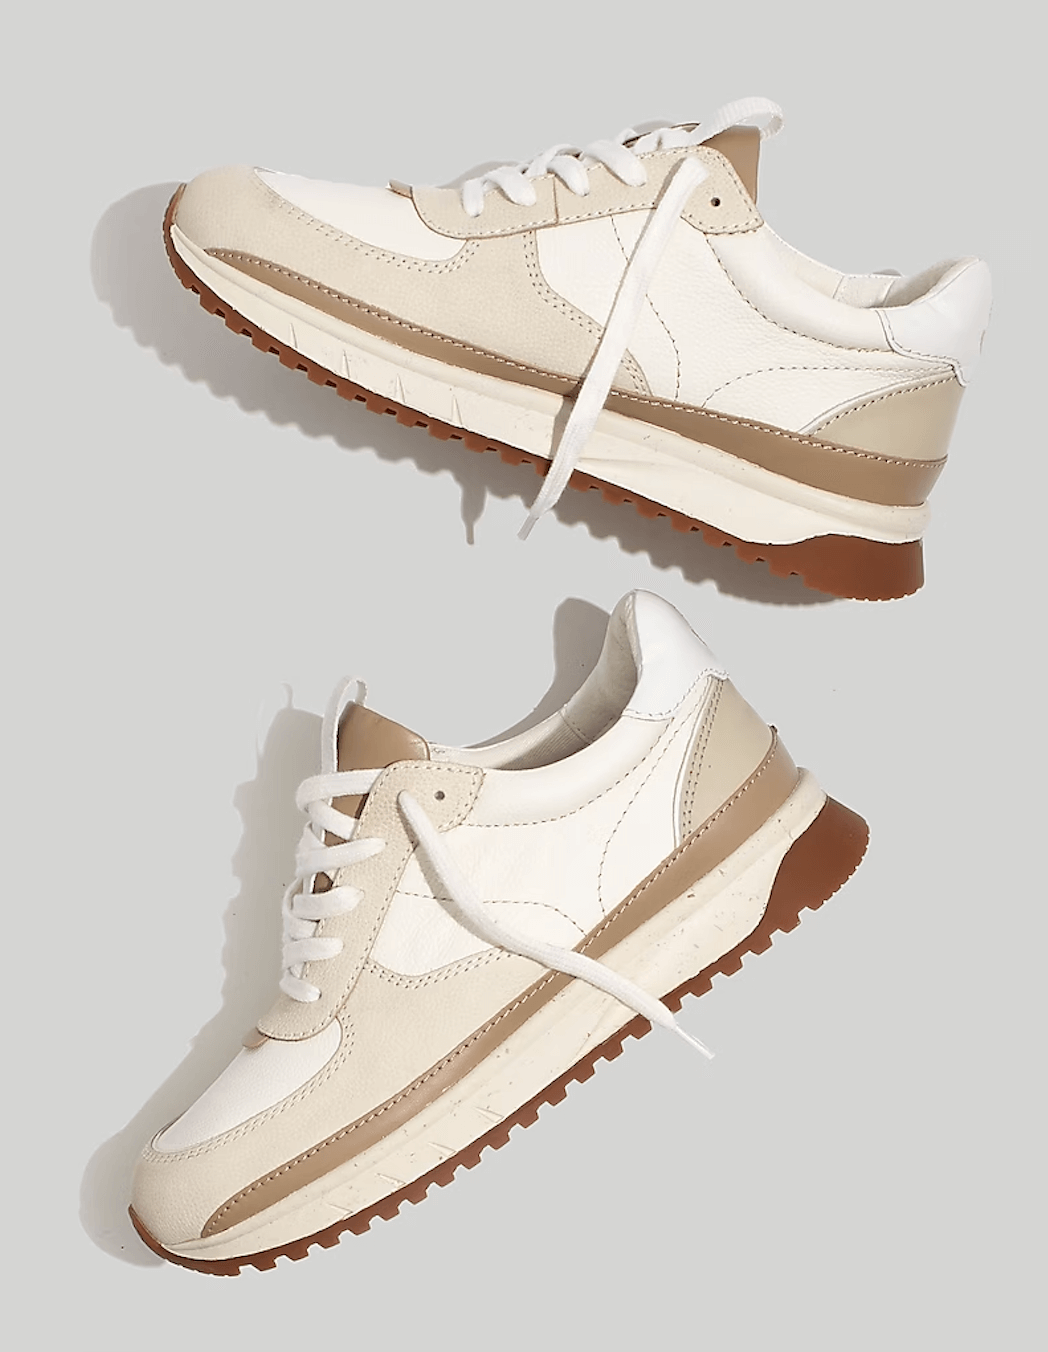 Madewell trainer sneakers with neutral color block design